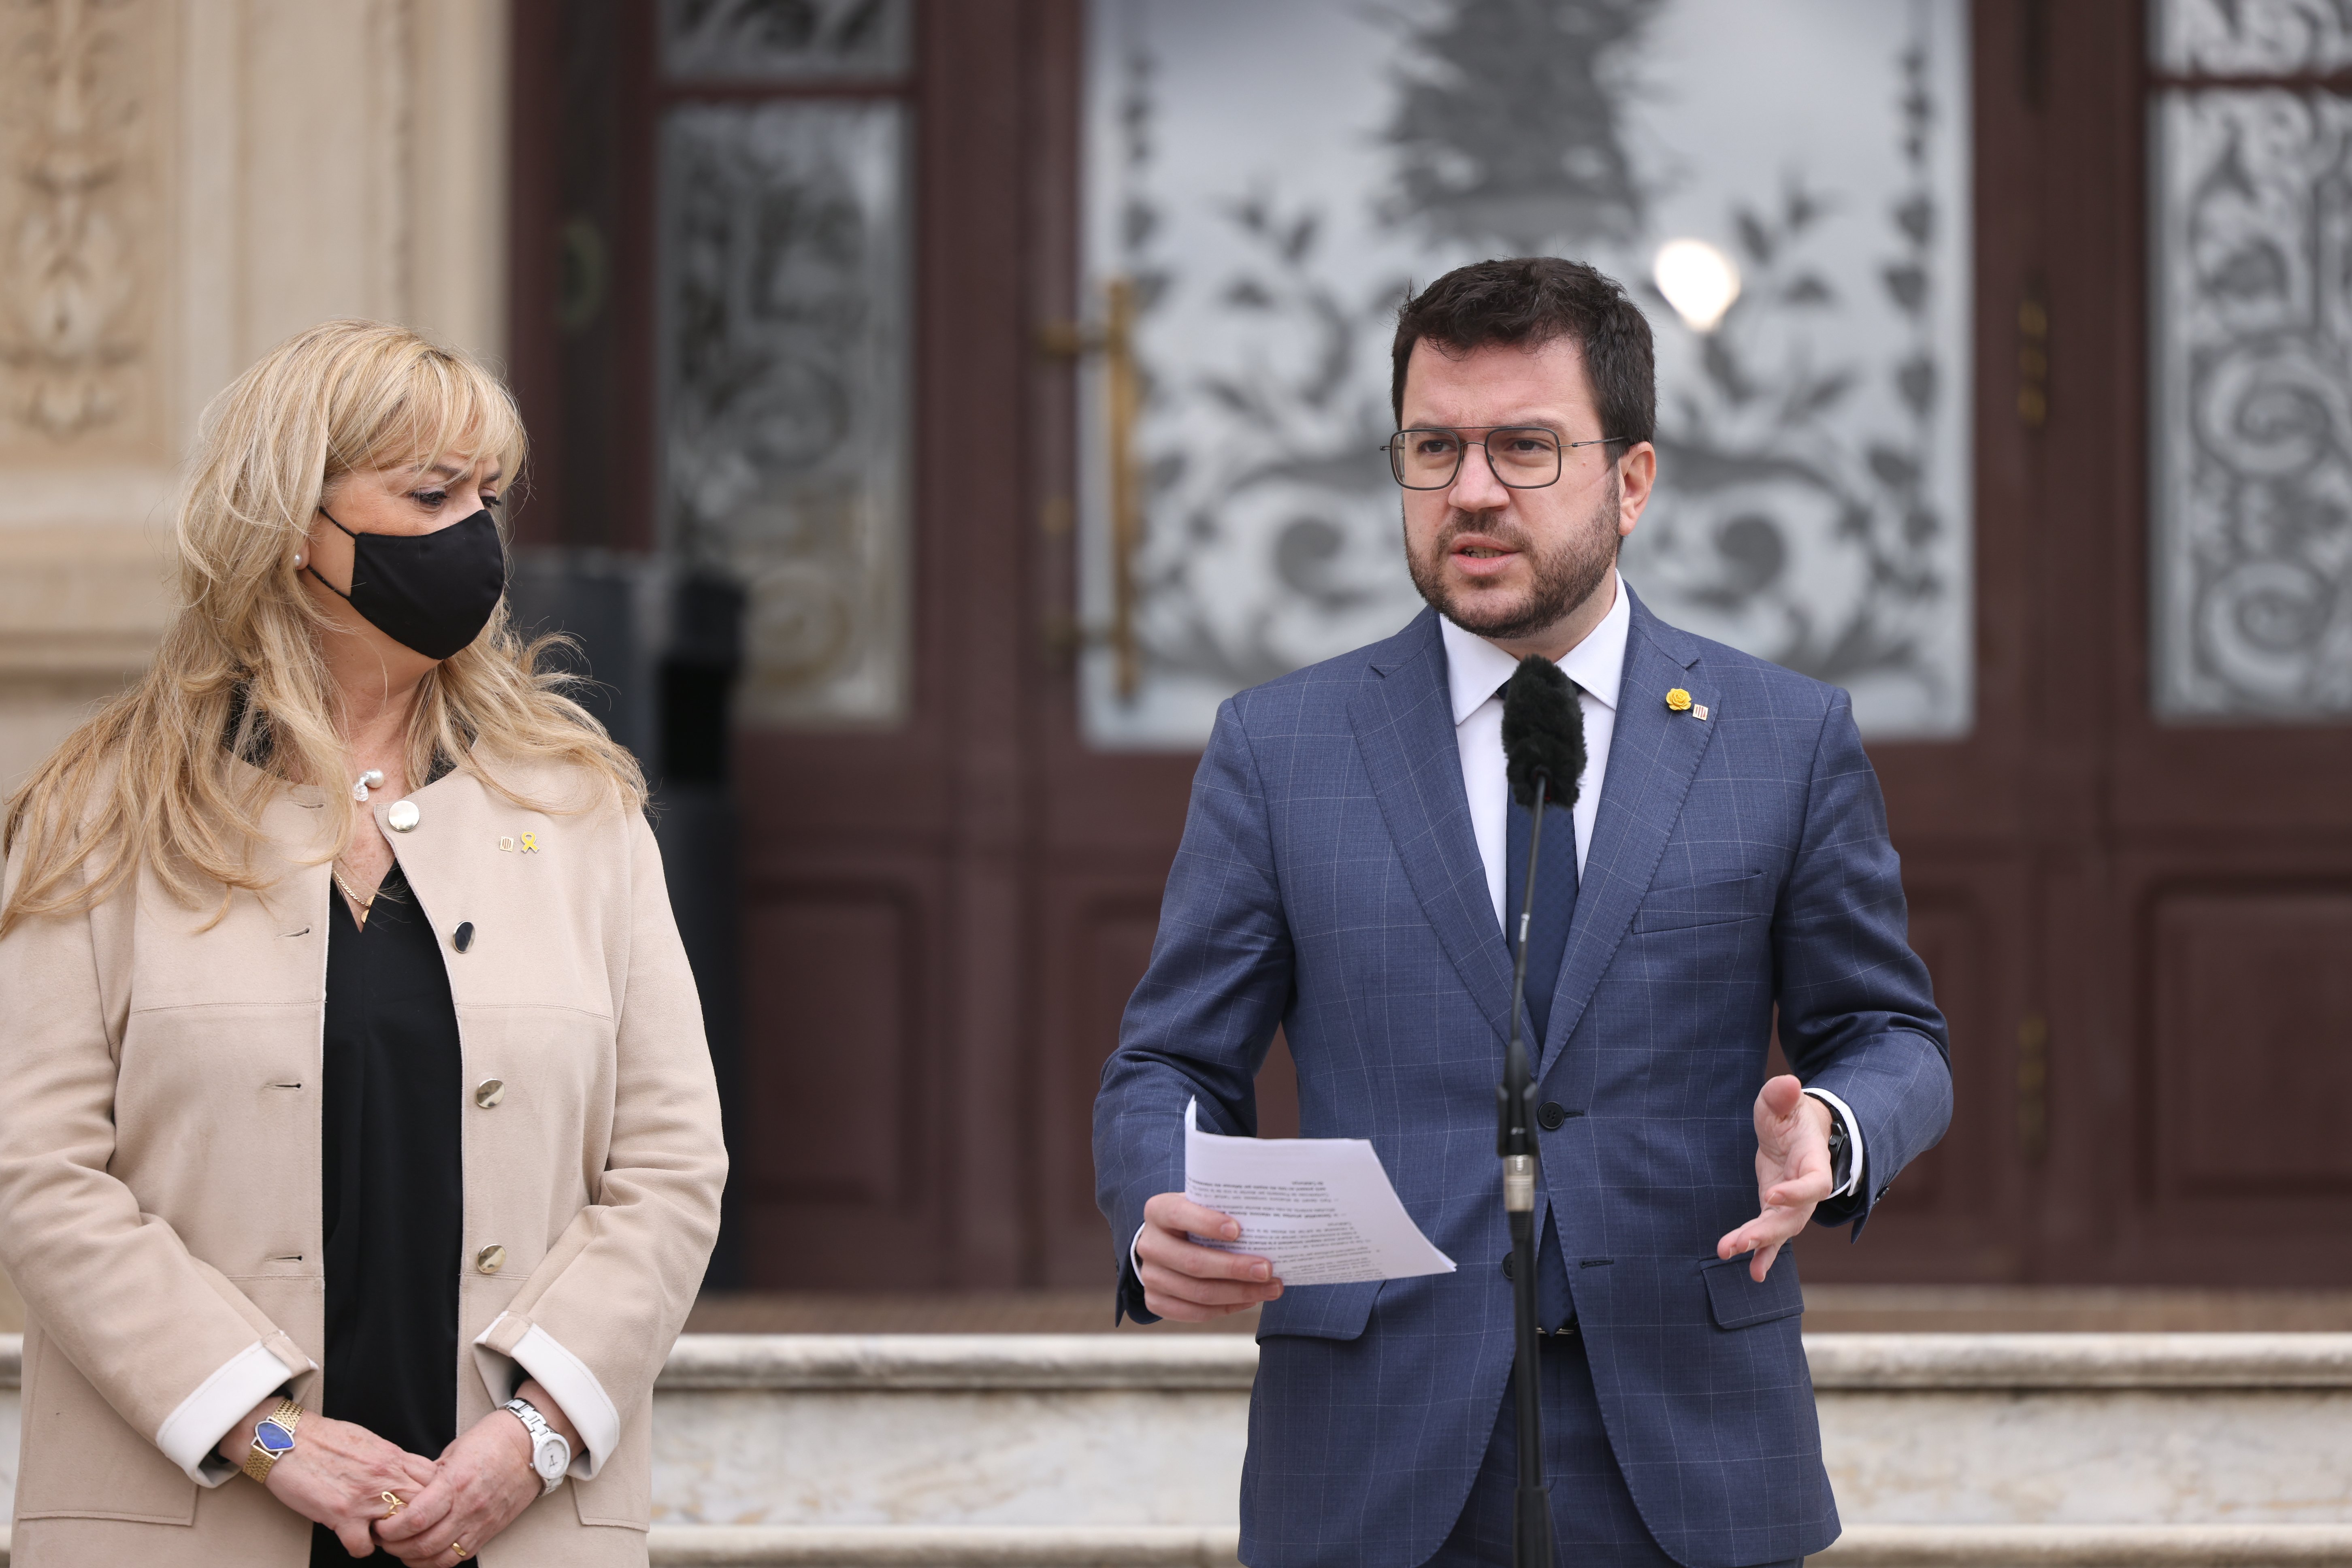 Aragonès will attend Spanish regional leaders' meeting: "The situation is exceptional"